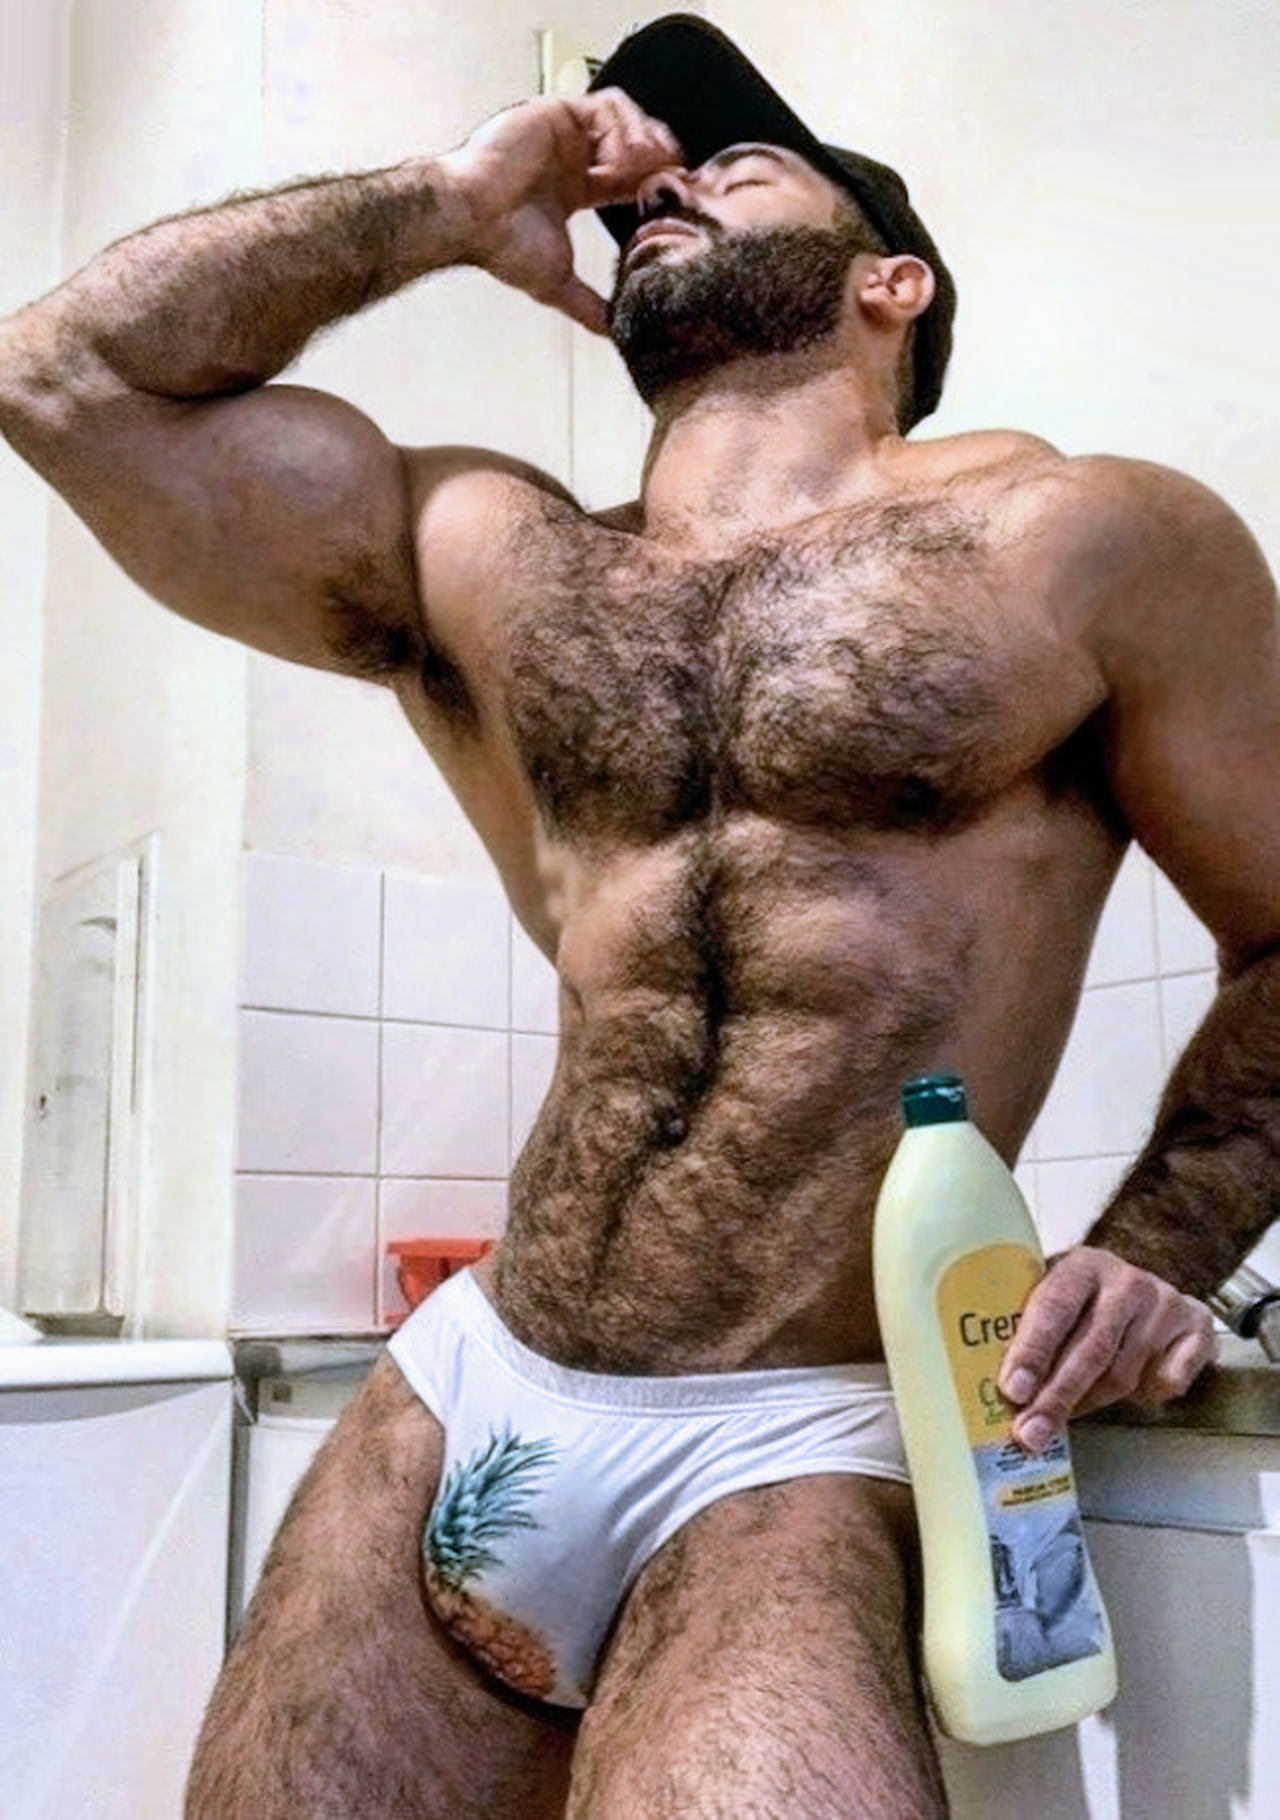 Photo by Smitty with the username @Resol702,  March 29, 2020 at 1:19 AM. The post is about the topic Gay Hairy Men